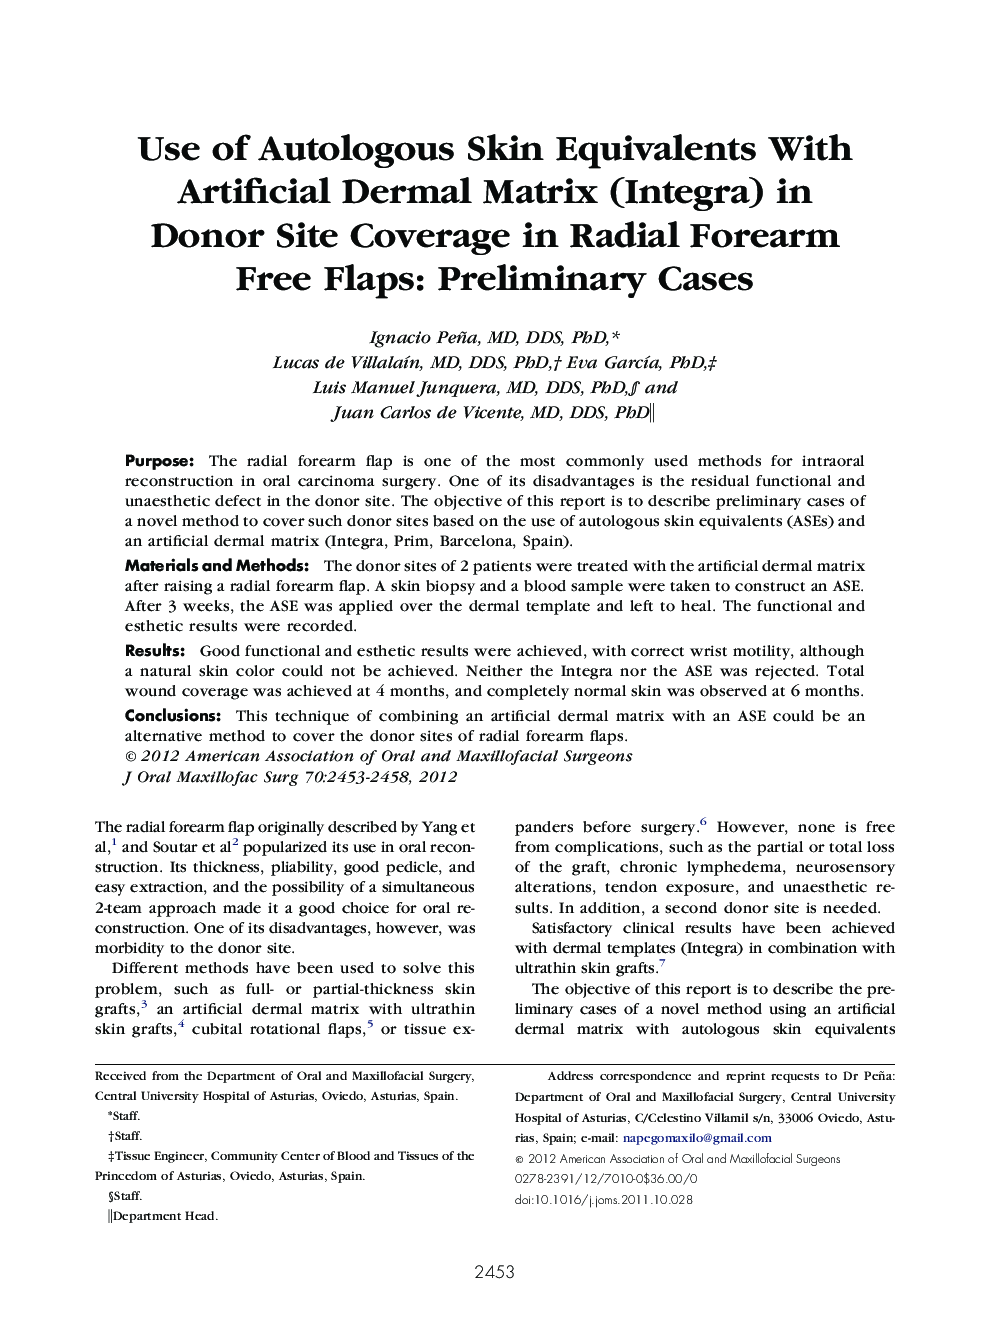 Use of Autologous Skin Equivalents With Artificial Dermal Matrix (Integra) in Donor Site Coverage in Radial Forearm Free Flaps: Preliminary Cases